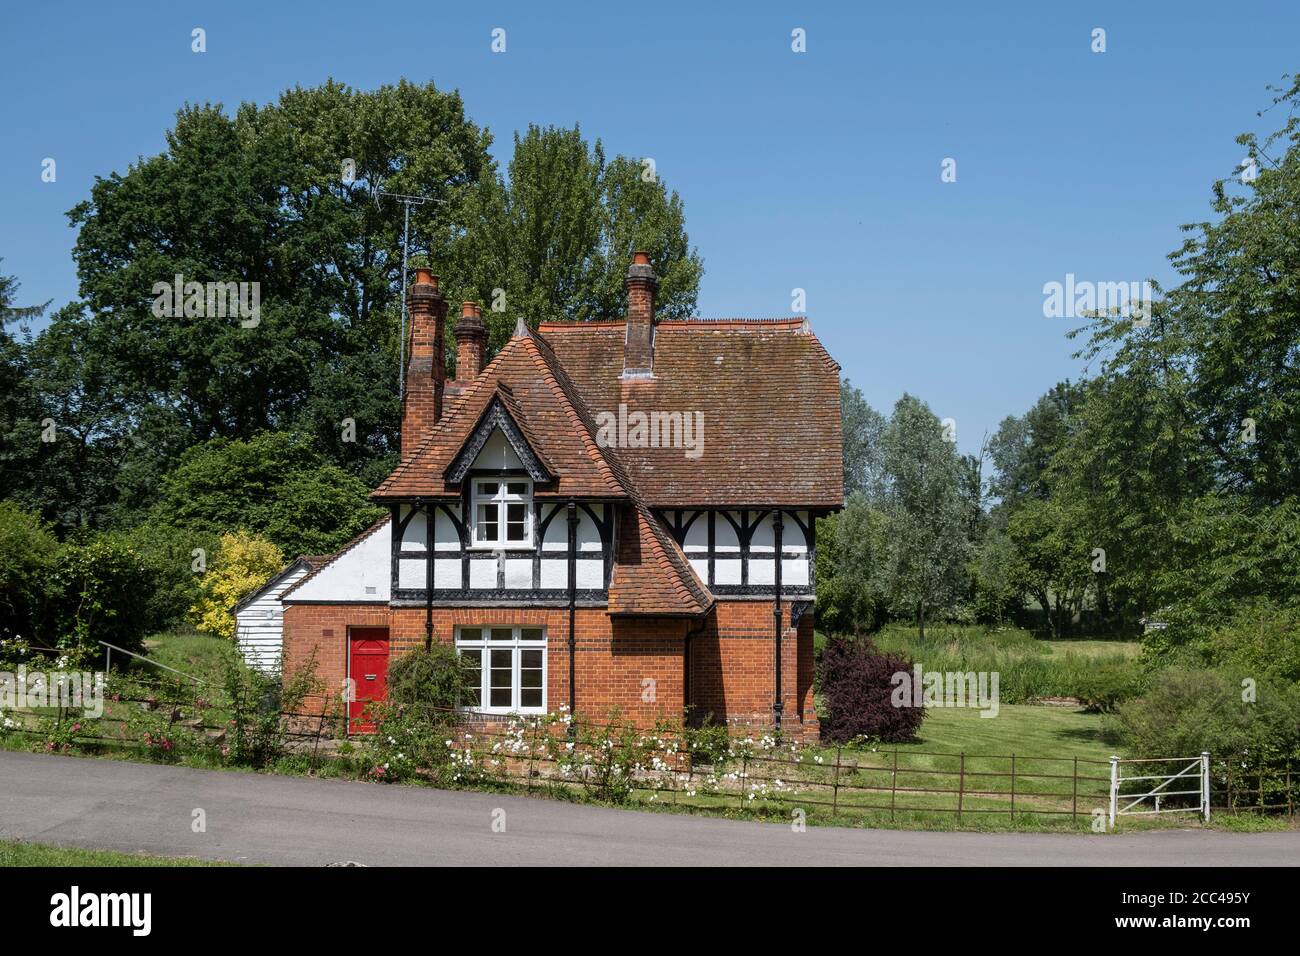 1873 Coachman's Cottage oder Gate Lodge Gate in Great Waltham, Essex, England Stockfoto